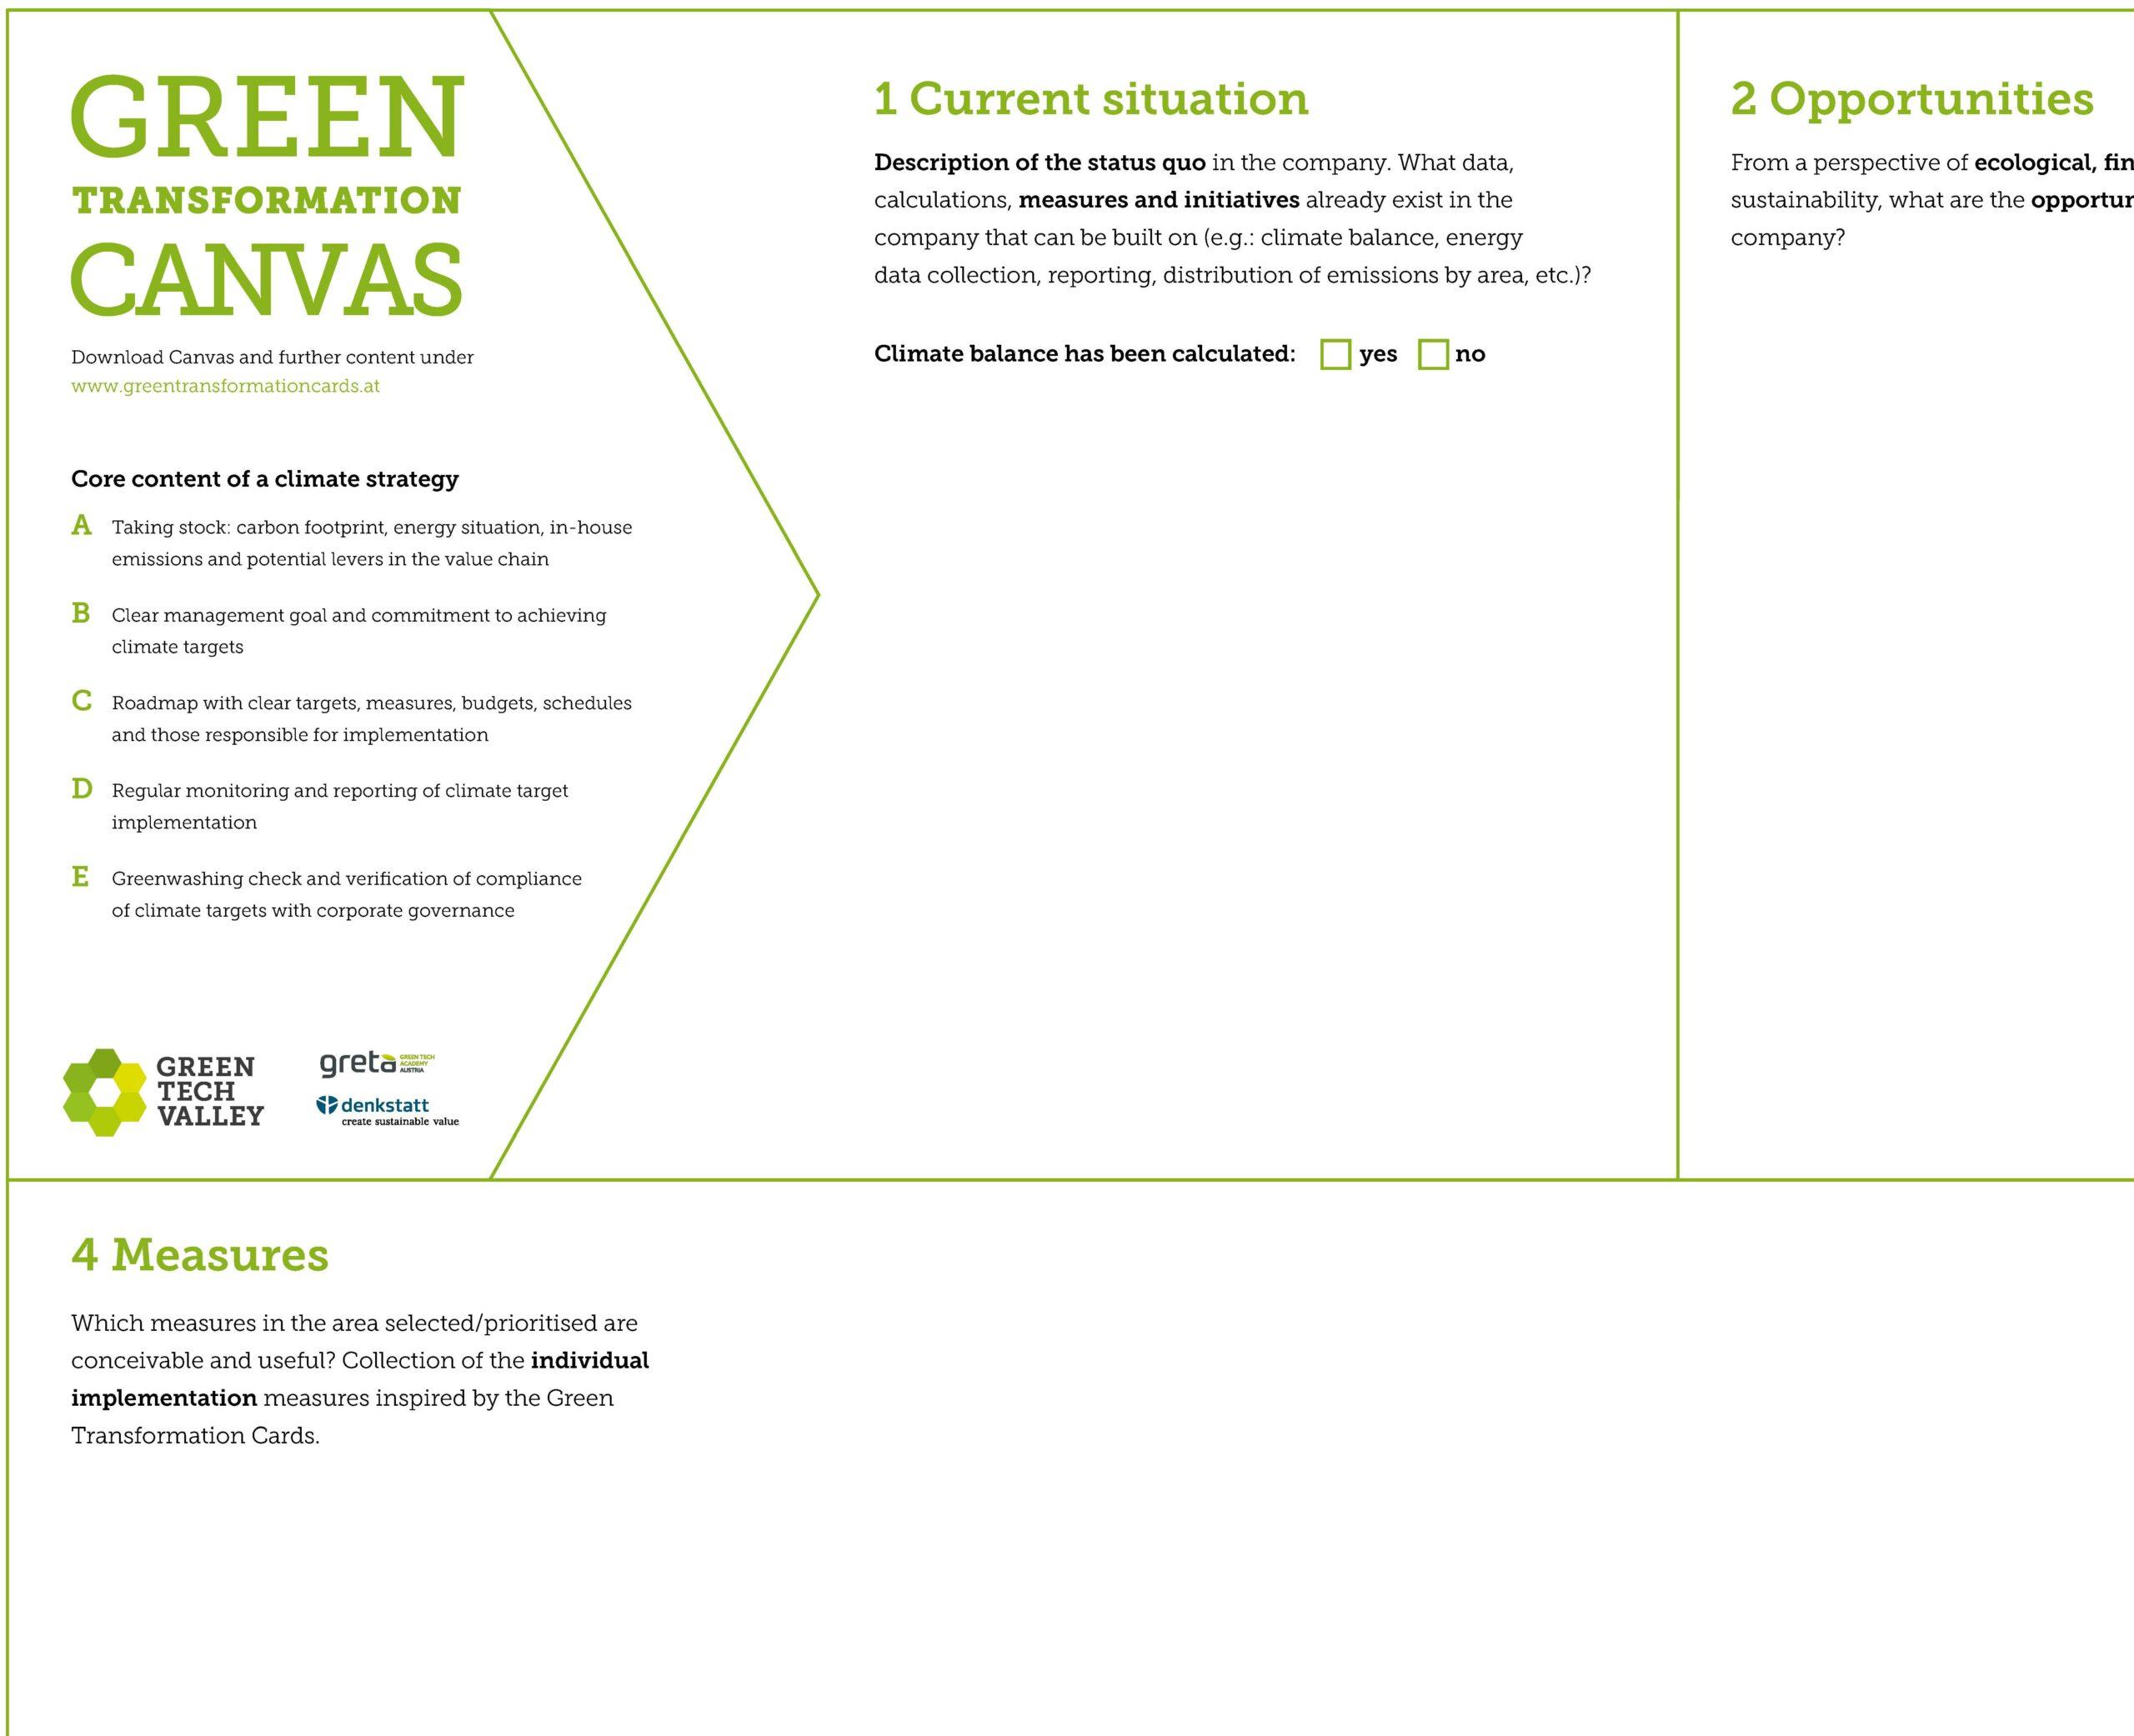 cutout of the Green Transformation Canvas